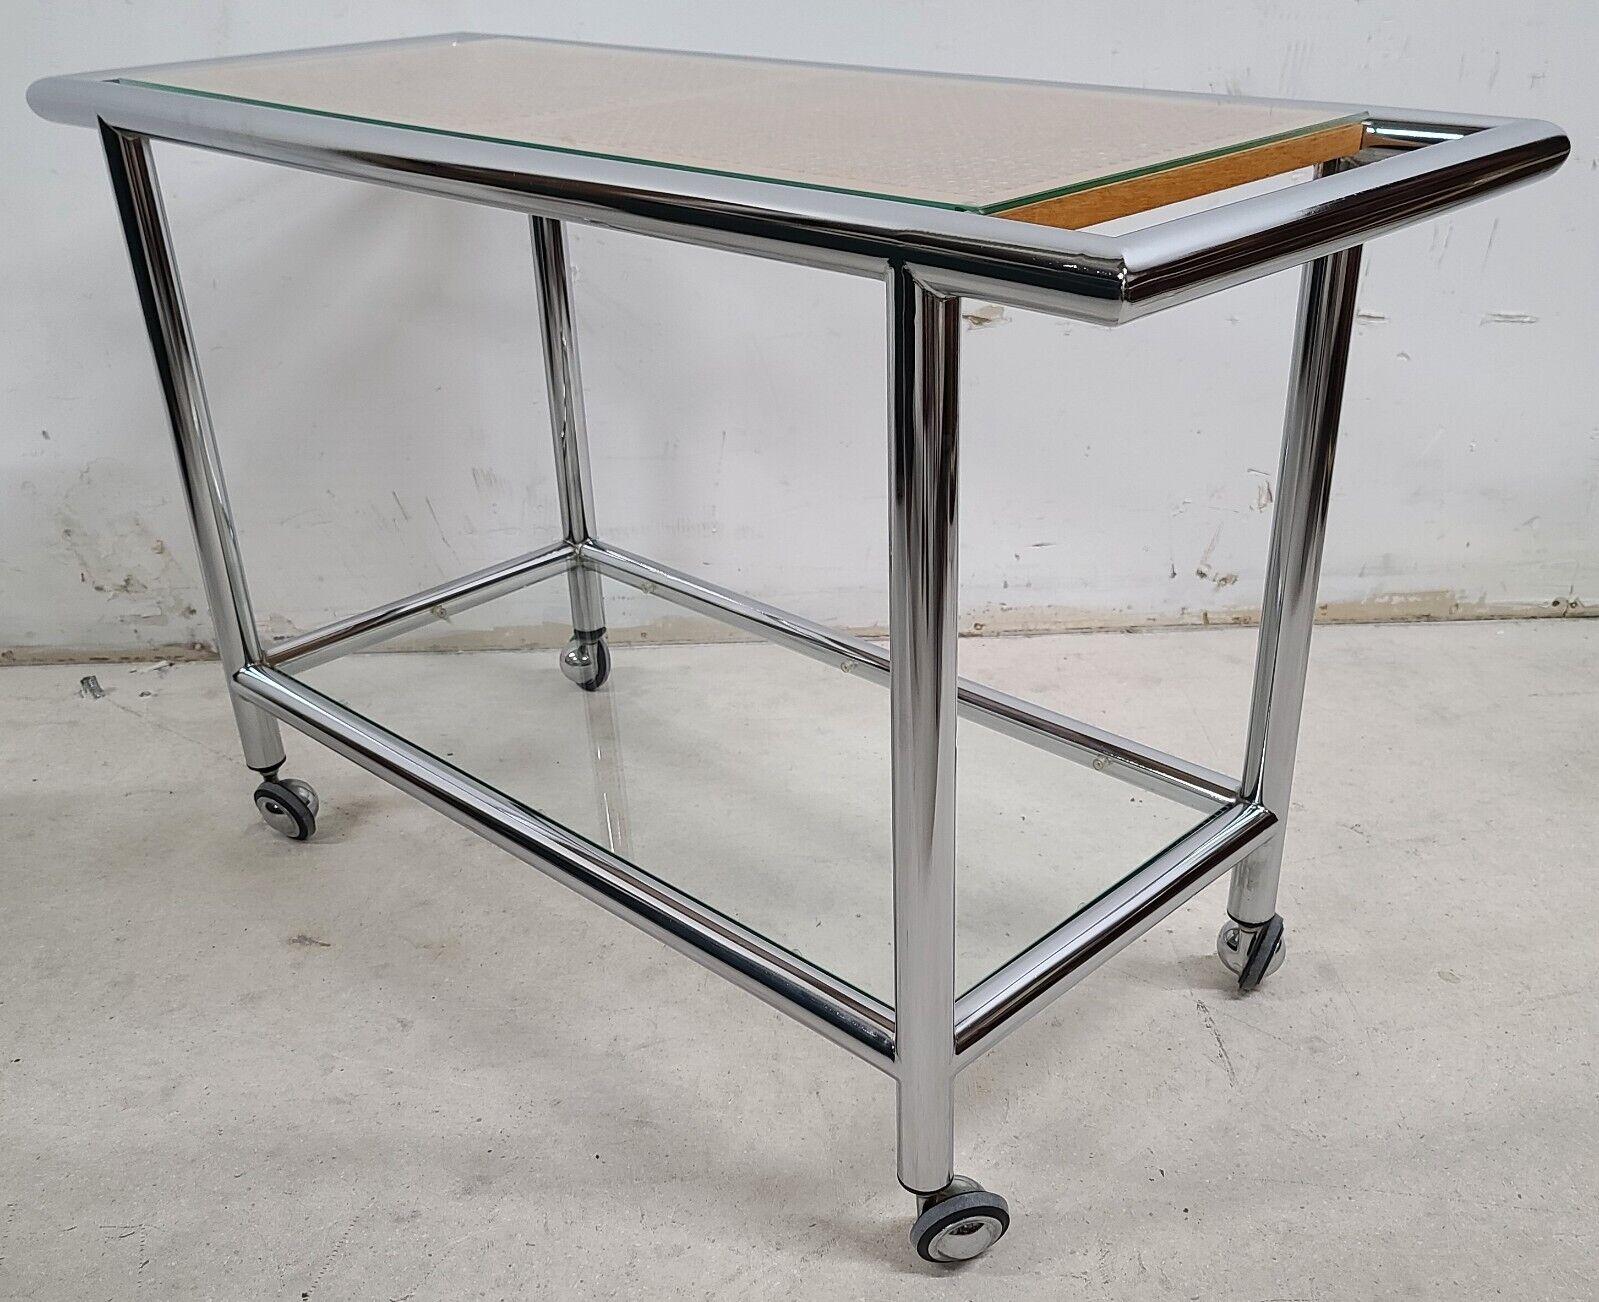 For FULL item description be sure to click on CONTINUE READING at the bottom of this listing.

MCM 1970s Chrome Wicker Glass Rolling Bar Serving Cart
Featuring very high-quality chrome frame and chrome Shepard Casters

Approximate Measurements in